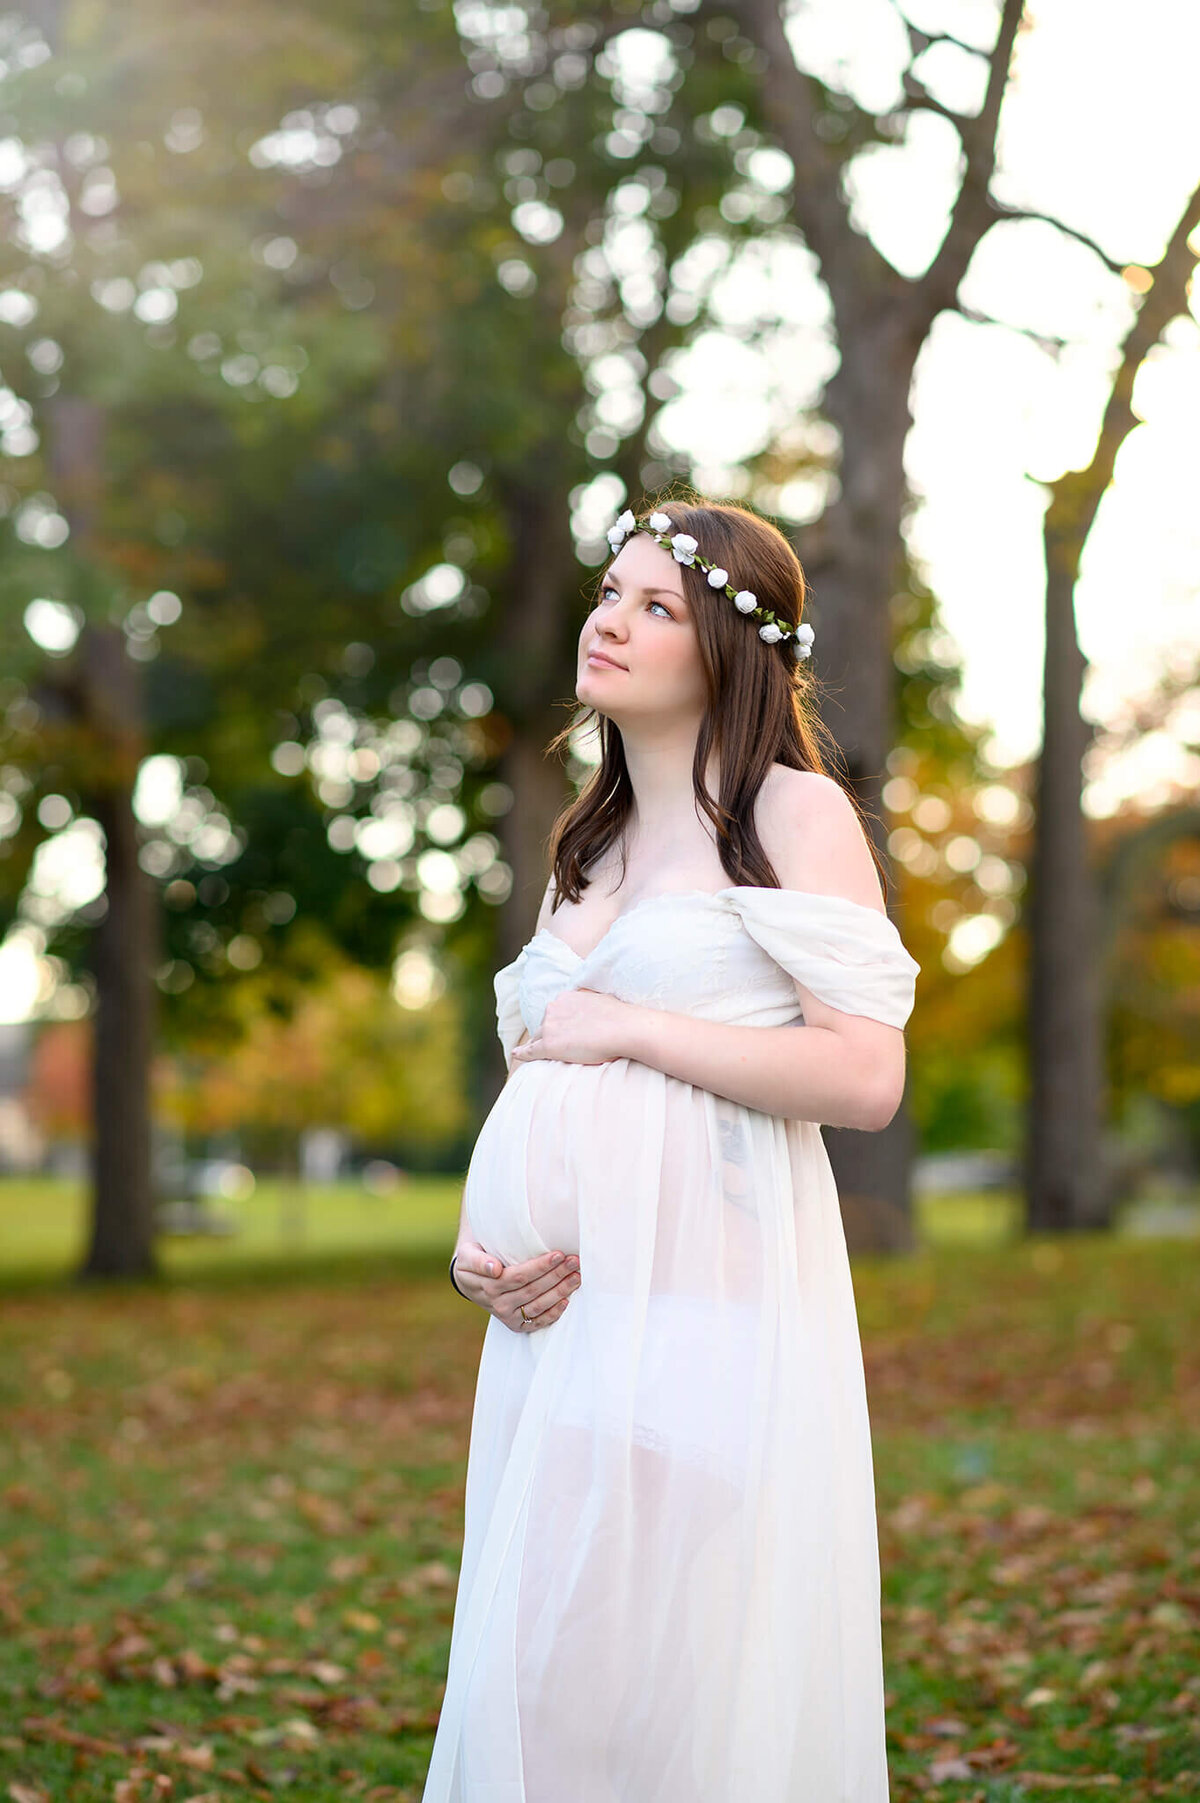 Outdoor maternity portrait of beautiful mom in white gown and crown holding her belly.